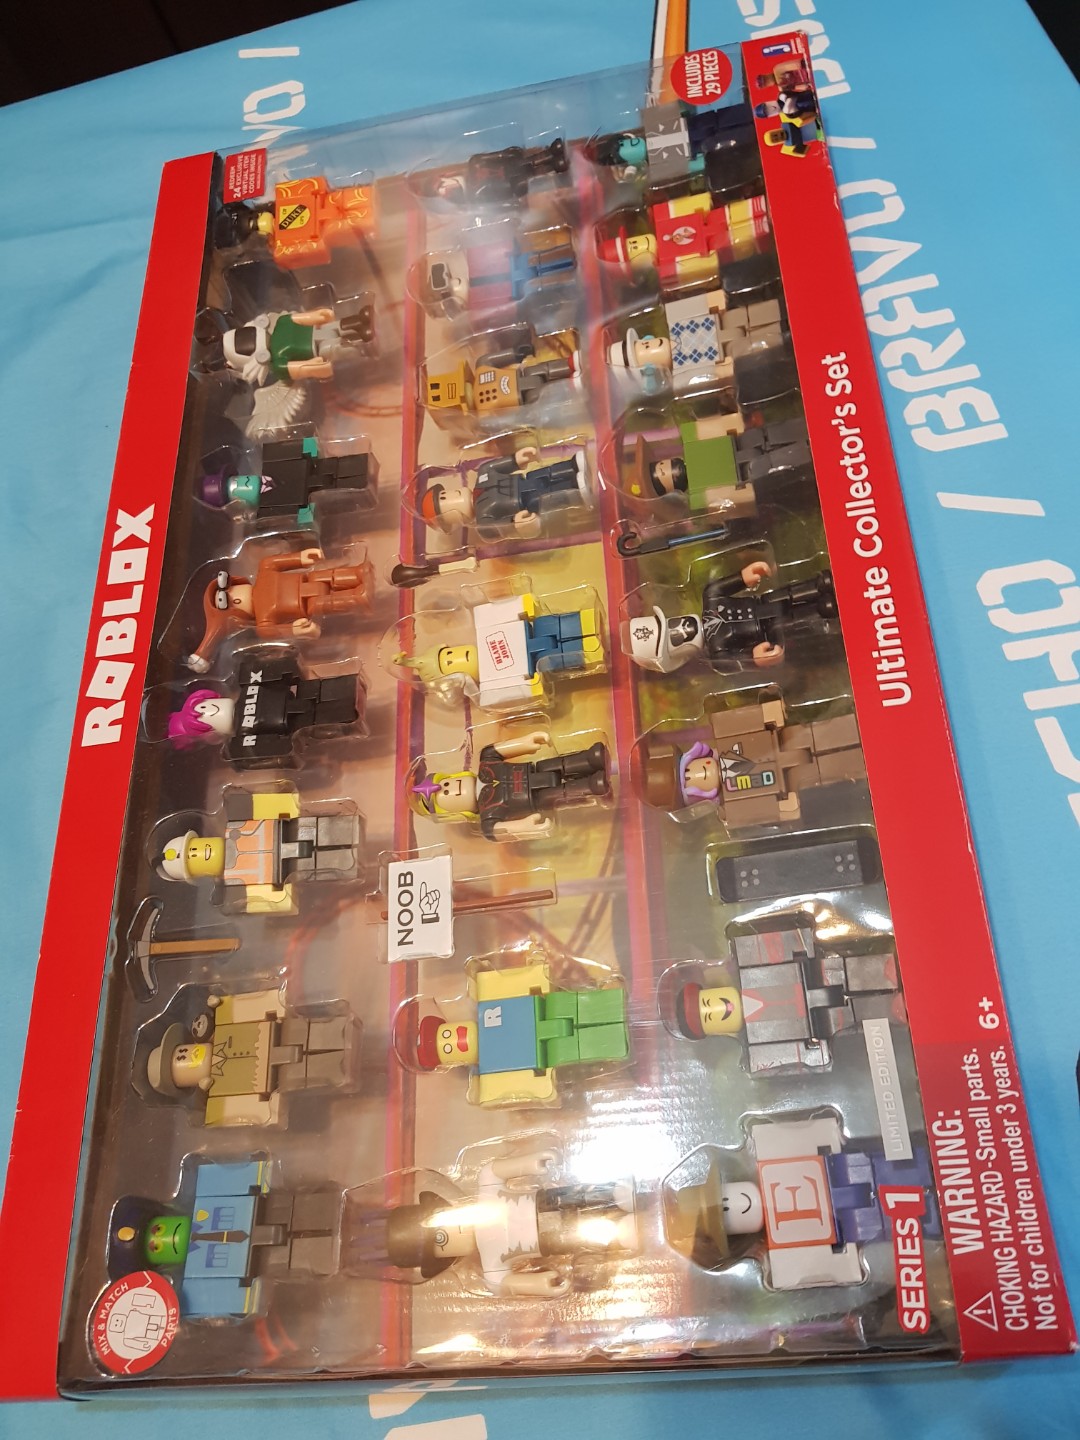 Roblox Series 1 Ultimate Collector Set Toys Games Others On Carousell - roblox service toys games others on carousell